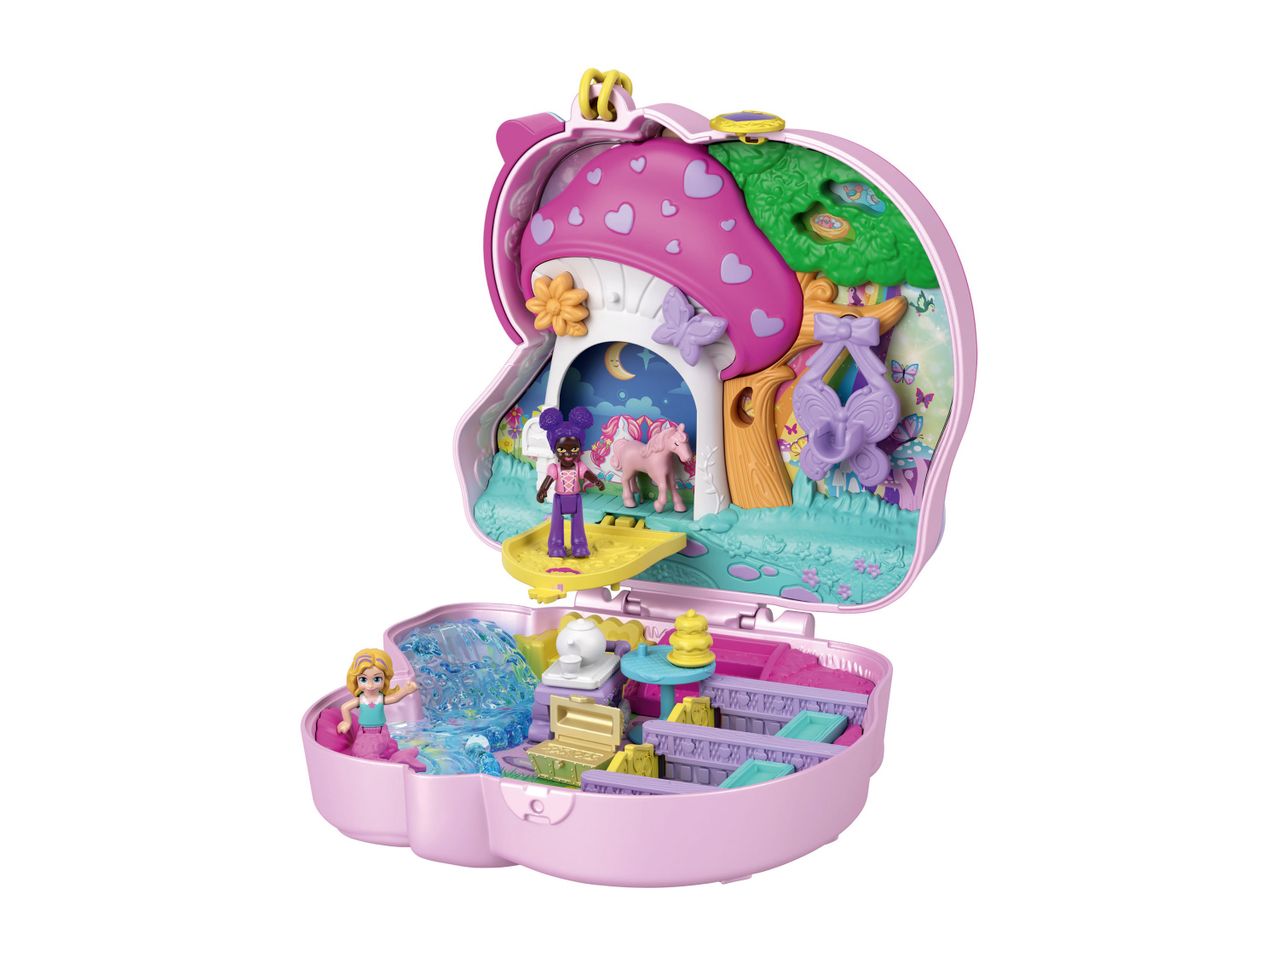 Go to full screen view: Polly Pocket Compact - Image 3